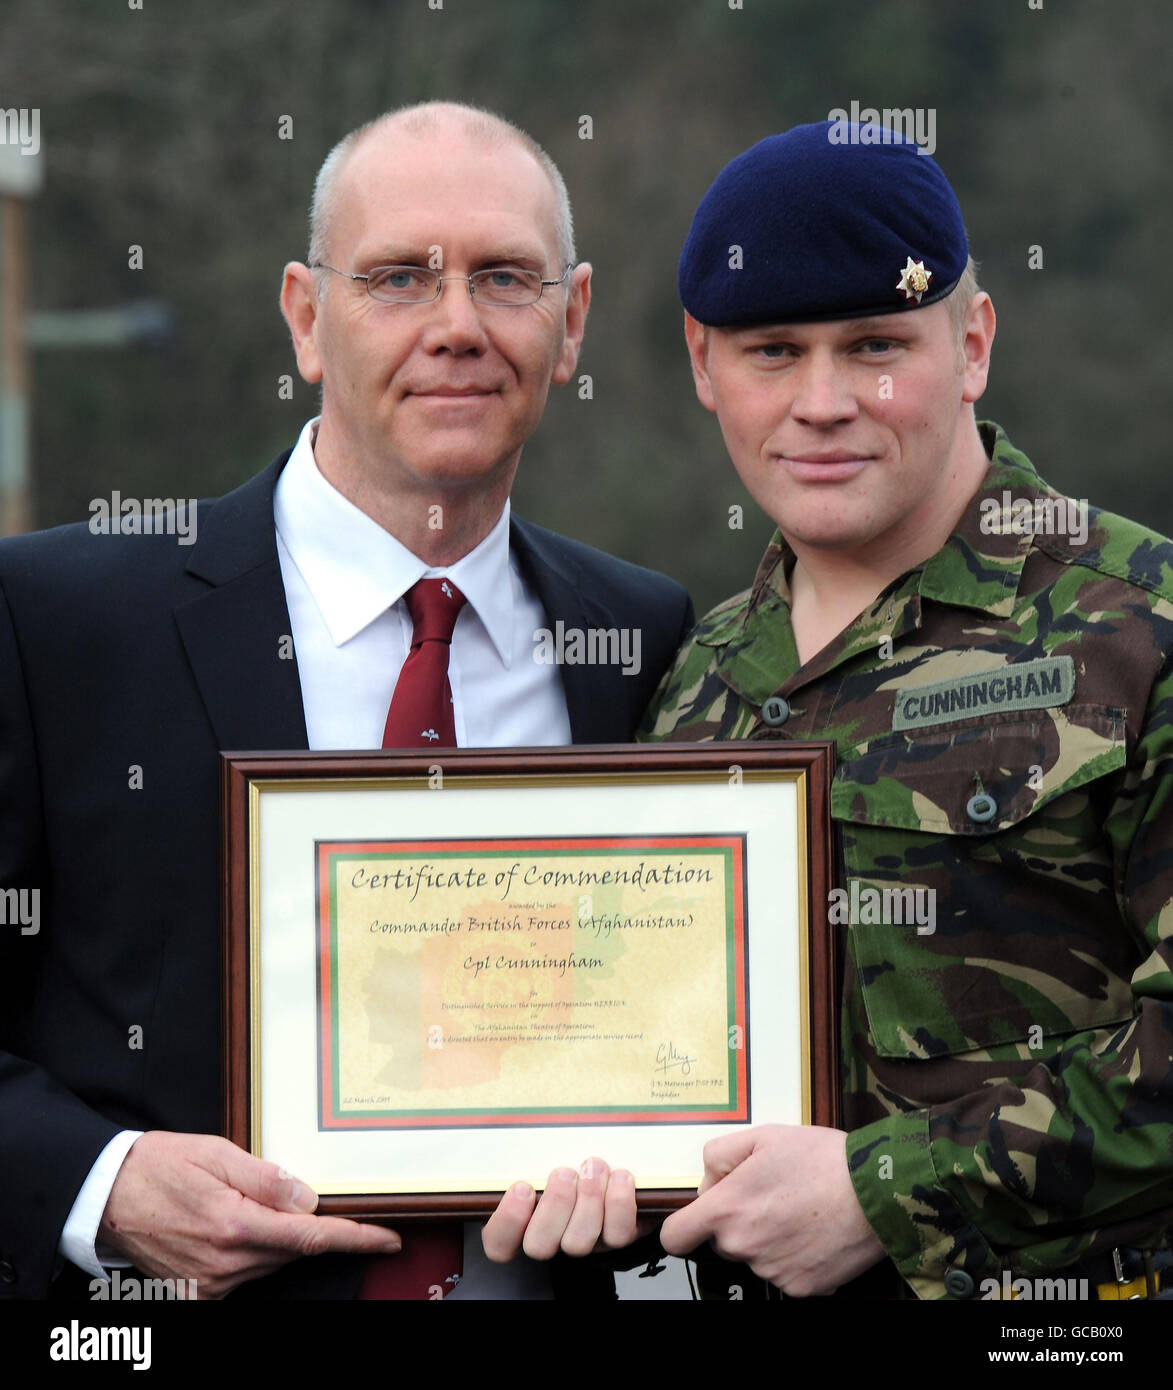 Sgt Luke Cunningham of the Royal Dragoon Guards with his father Phil and the bravery award presented to him by the Prince of Wales during his visit to Catterick Garrison today ahead of the Regiment's deployment to Afghanistan next month. The Prince is Colonel in Chief of the Regiment. Stock Photo